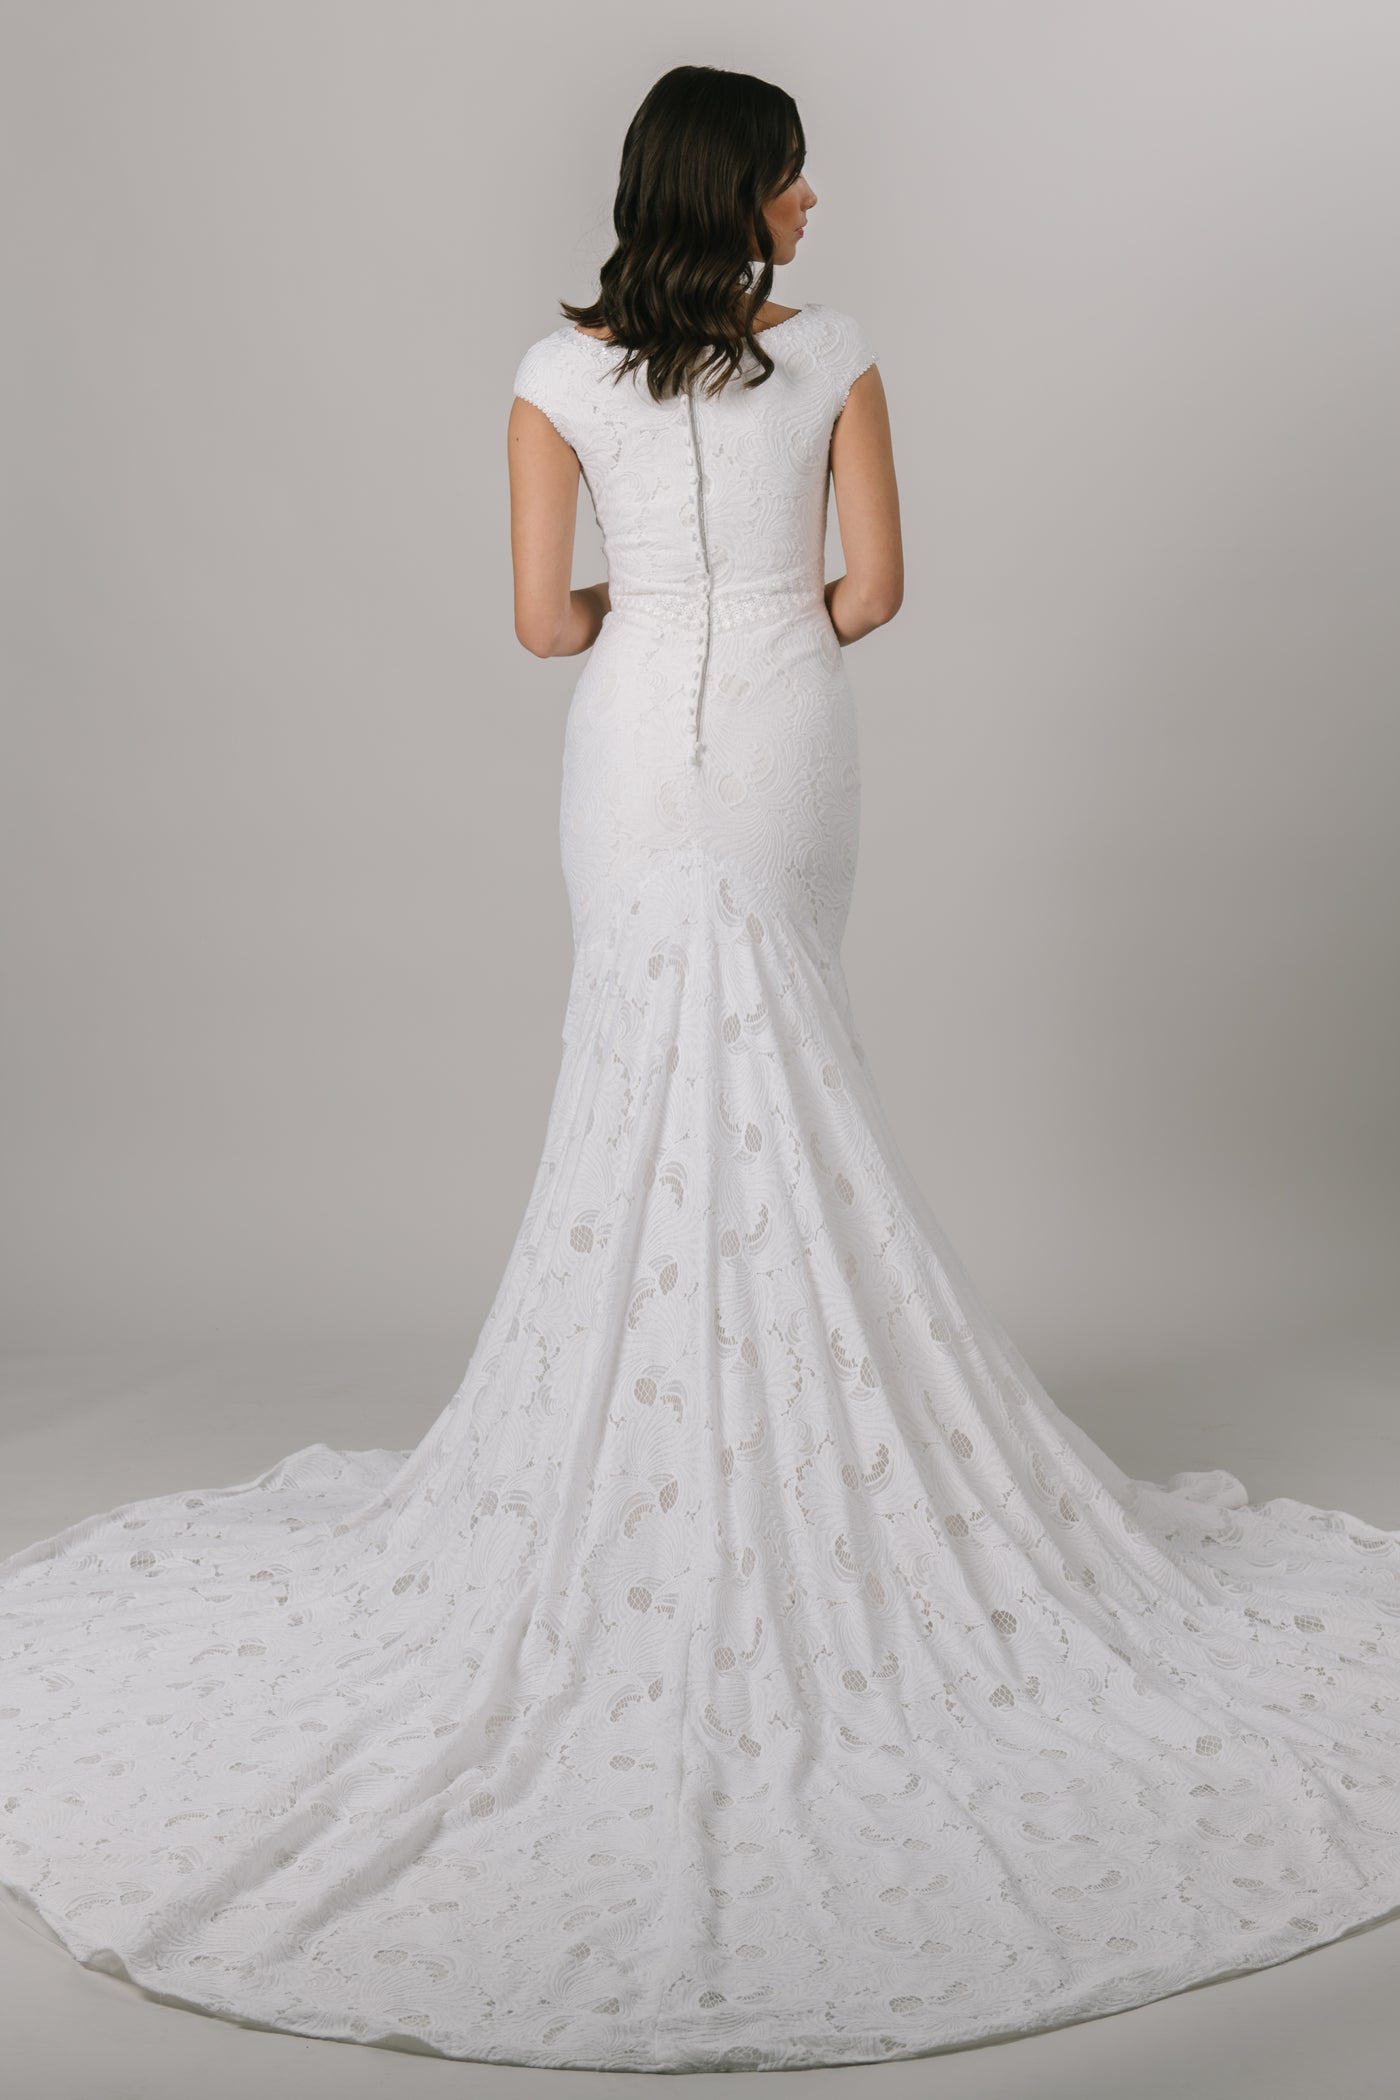 Fall in love with lace all over again! This stunning modest wedding dress features a sophisticated lace pattern, flattering fit-and-flare silhouette and an accentuated waistband that everyone loves! Shown in Sand/Ivory. From a bridal shop in downtown Salt Lake City. 